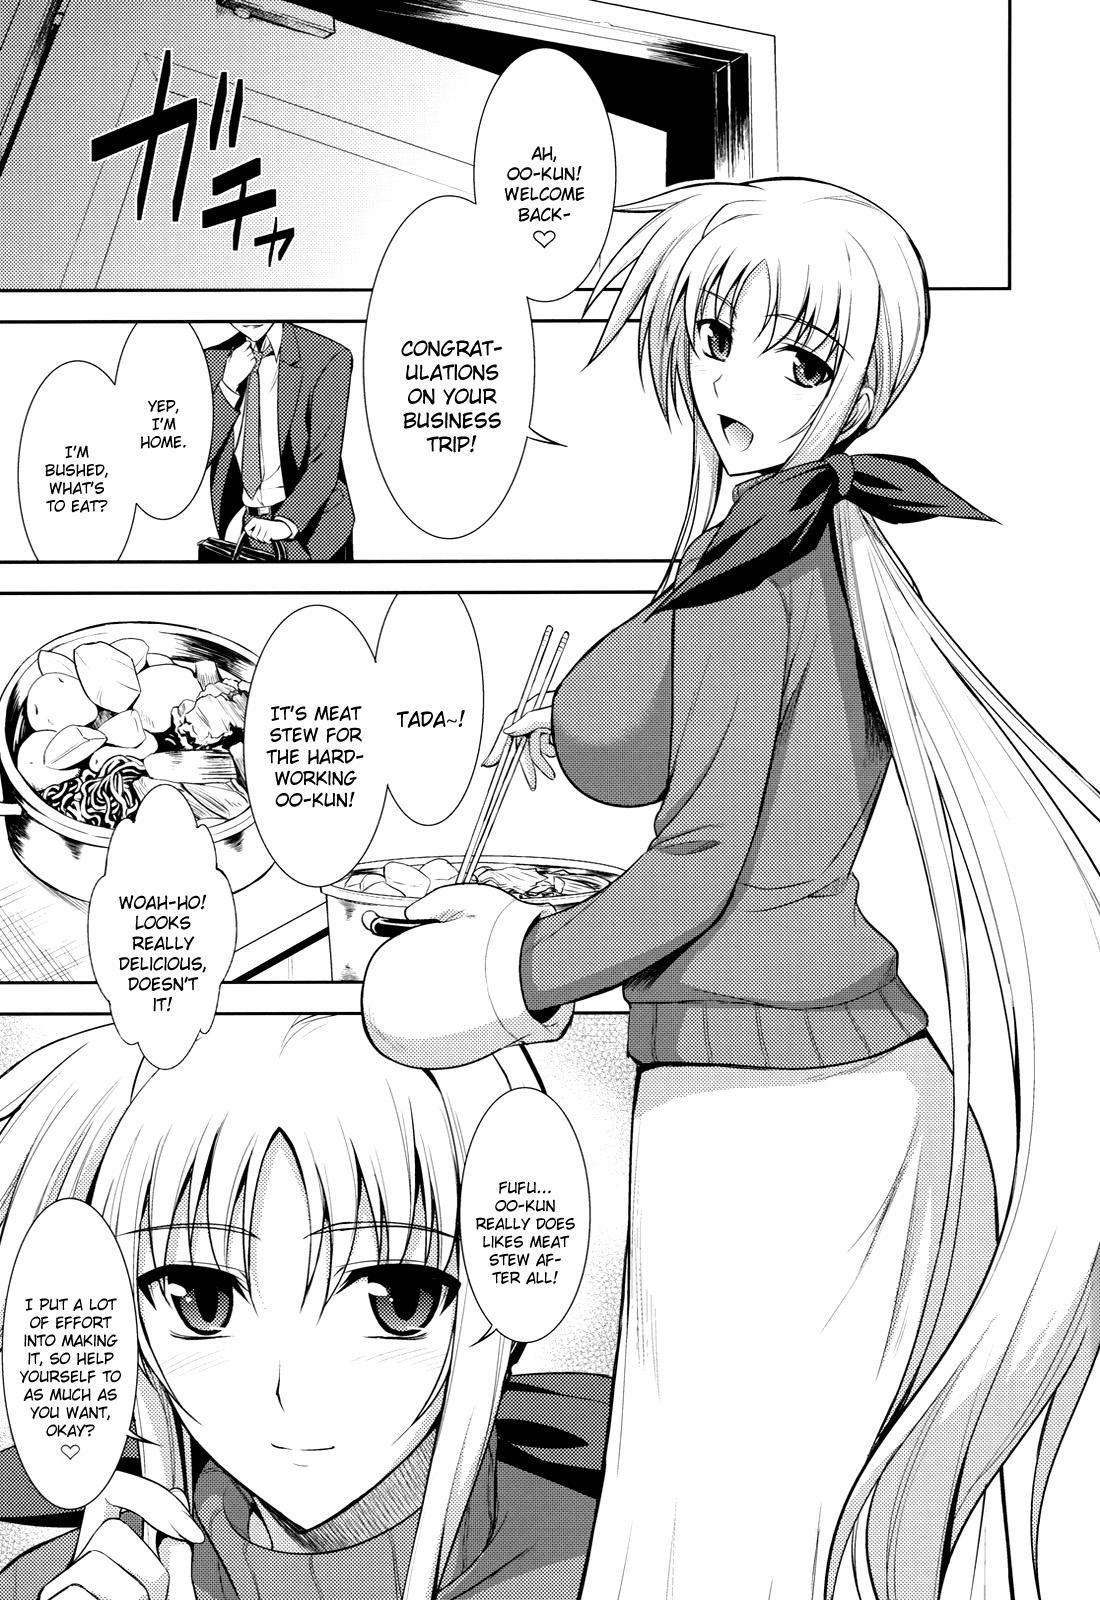 Tranny (C79) [Type-G (Ishigaki Takashi)] Ore to Fate to One-room | My and Fate's One-Room (Mahou Shoujo Lyrical Nanoha) [English] =LWB= - Mahou shoujo lyrical nanoha Old - Page 2